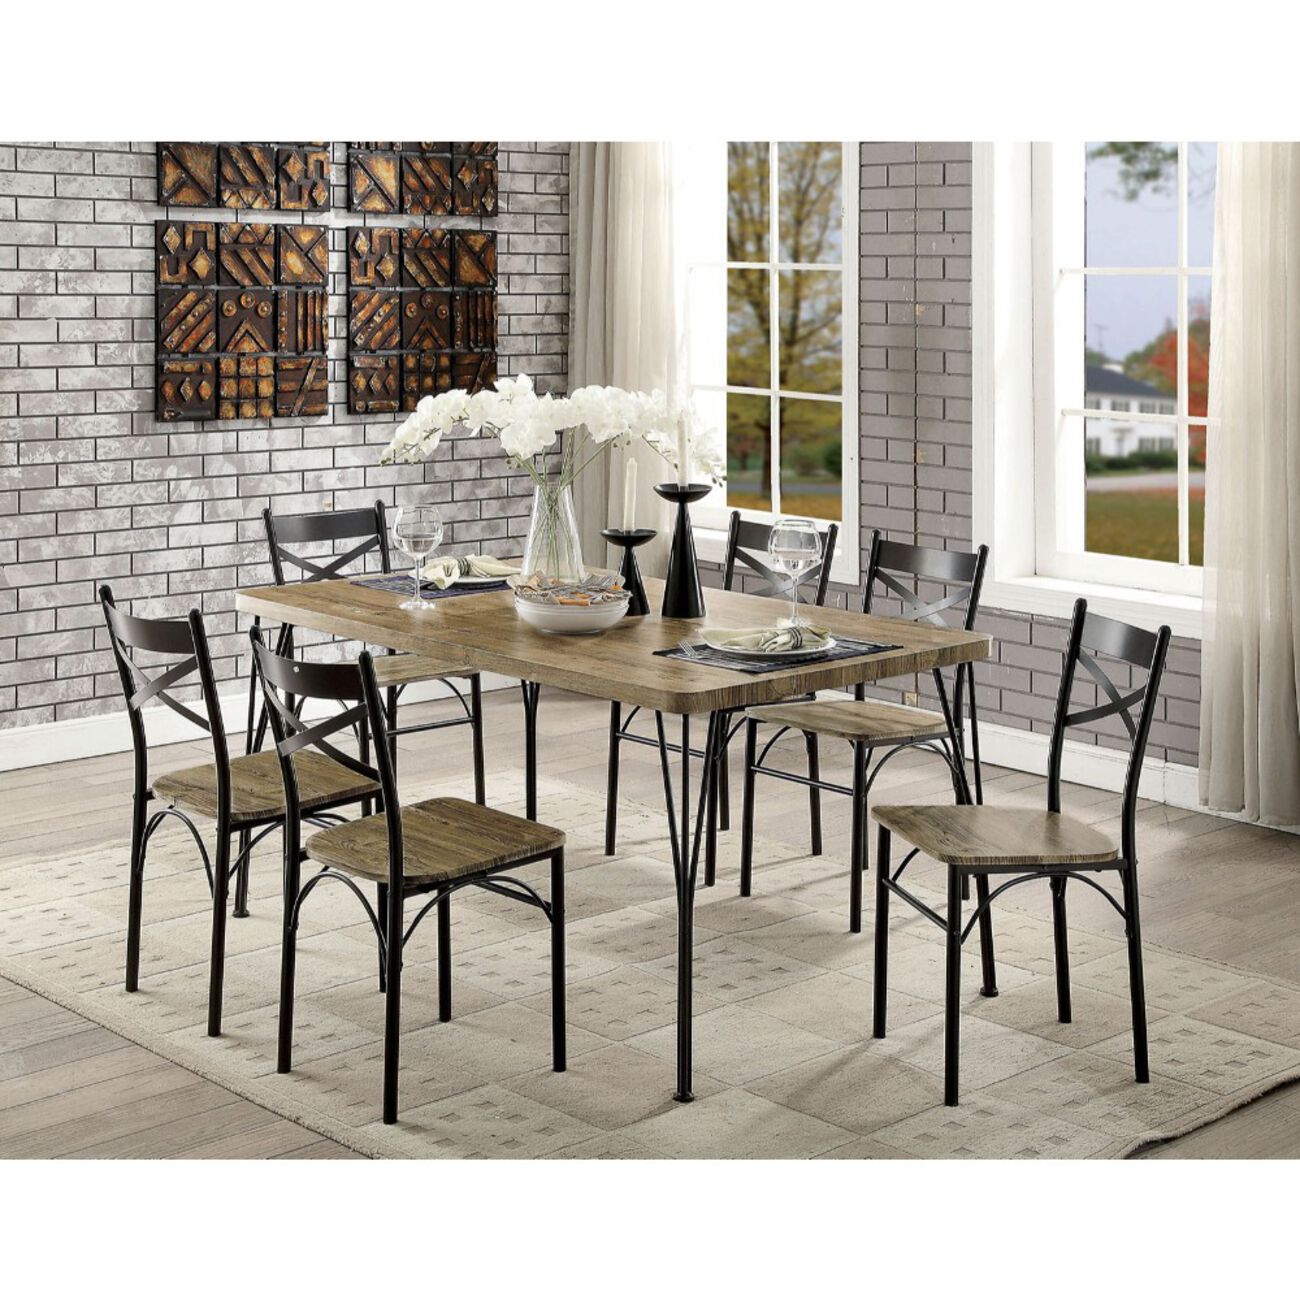 7-Piece Wooden Dining Table Set In Gray and Weathered Brown